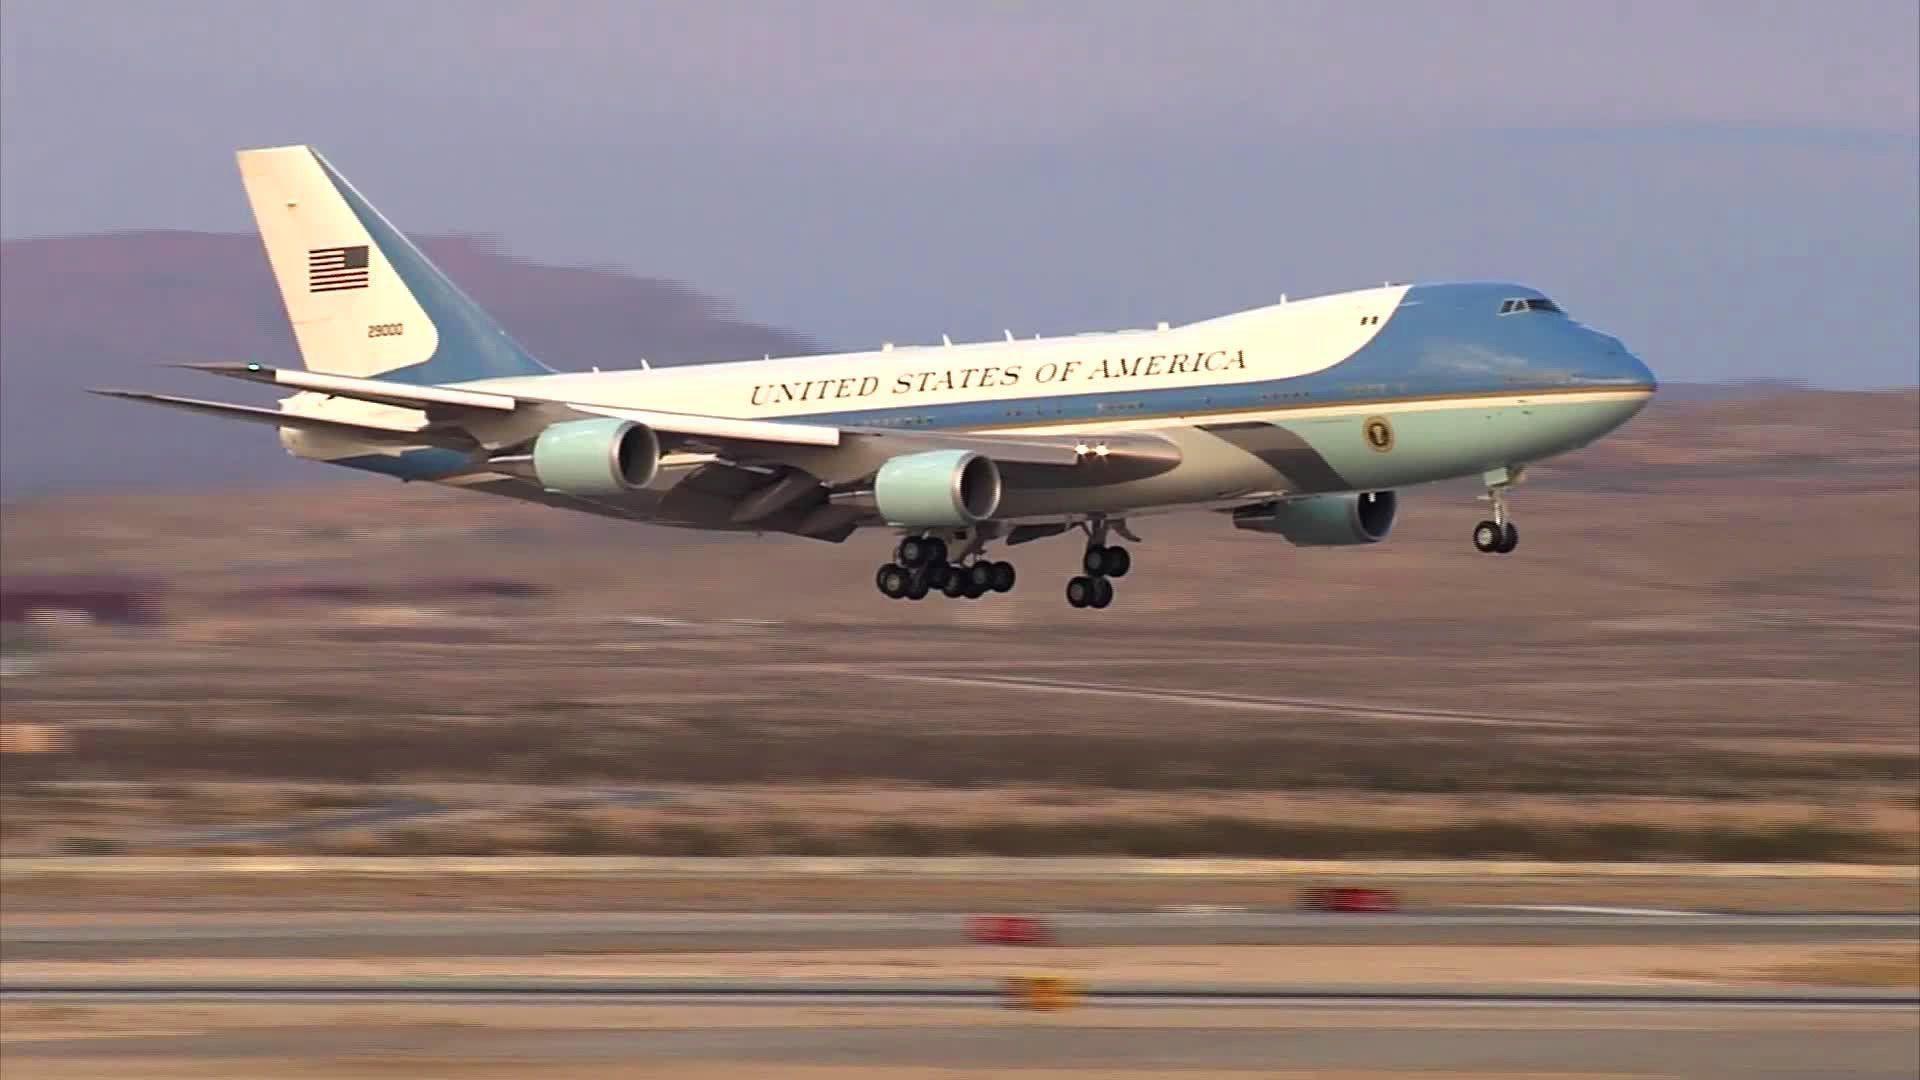 Boeing VC 25 Air Force One Of The United States Barack